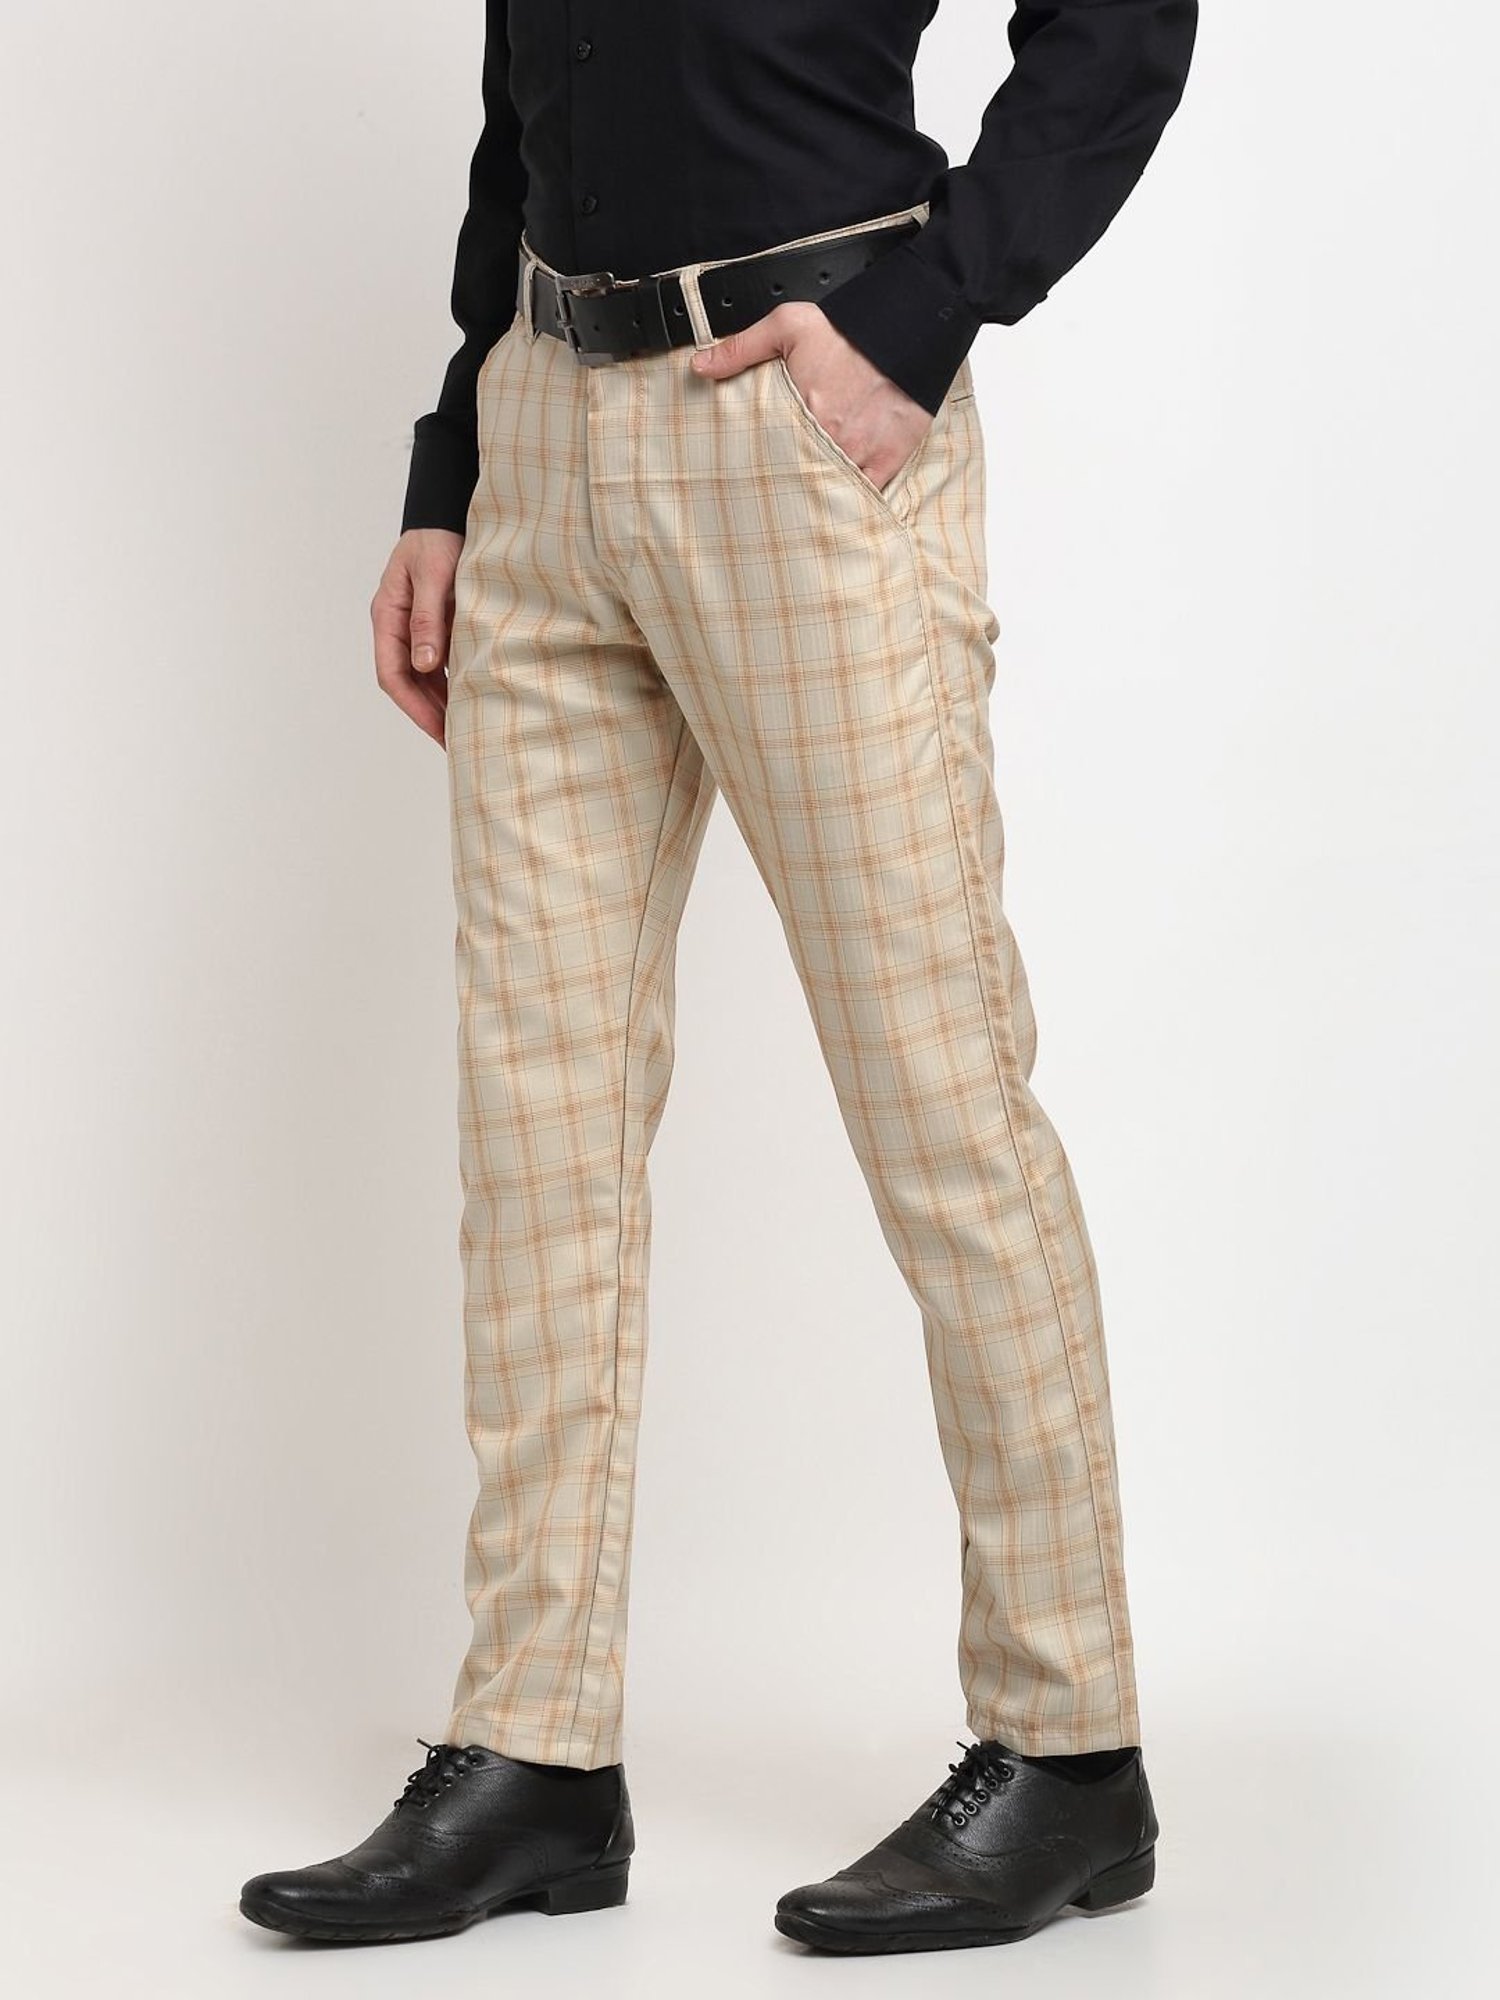 Slim Fit trousers - Beige/Checked - Men | H&M